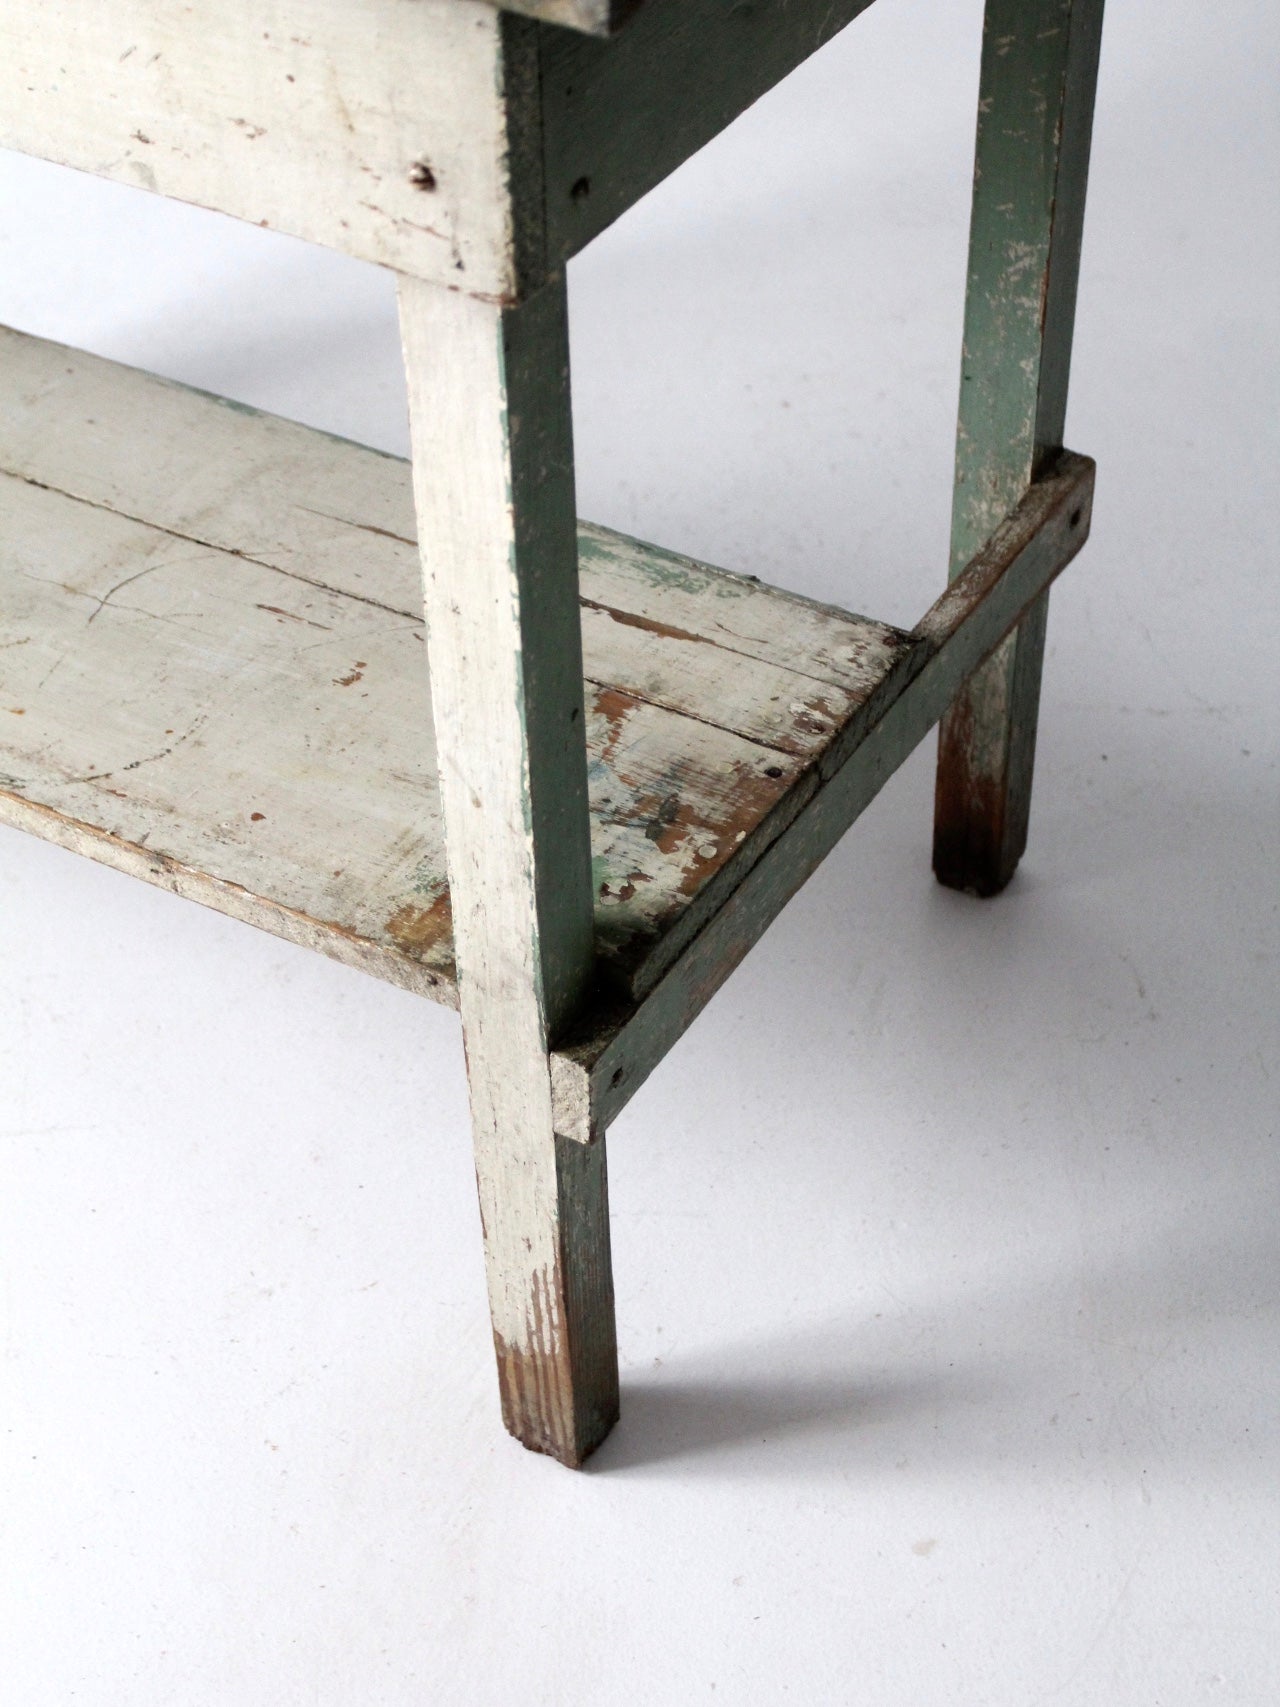 antique table with galvanized top